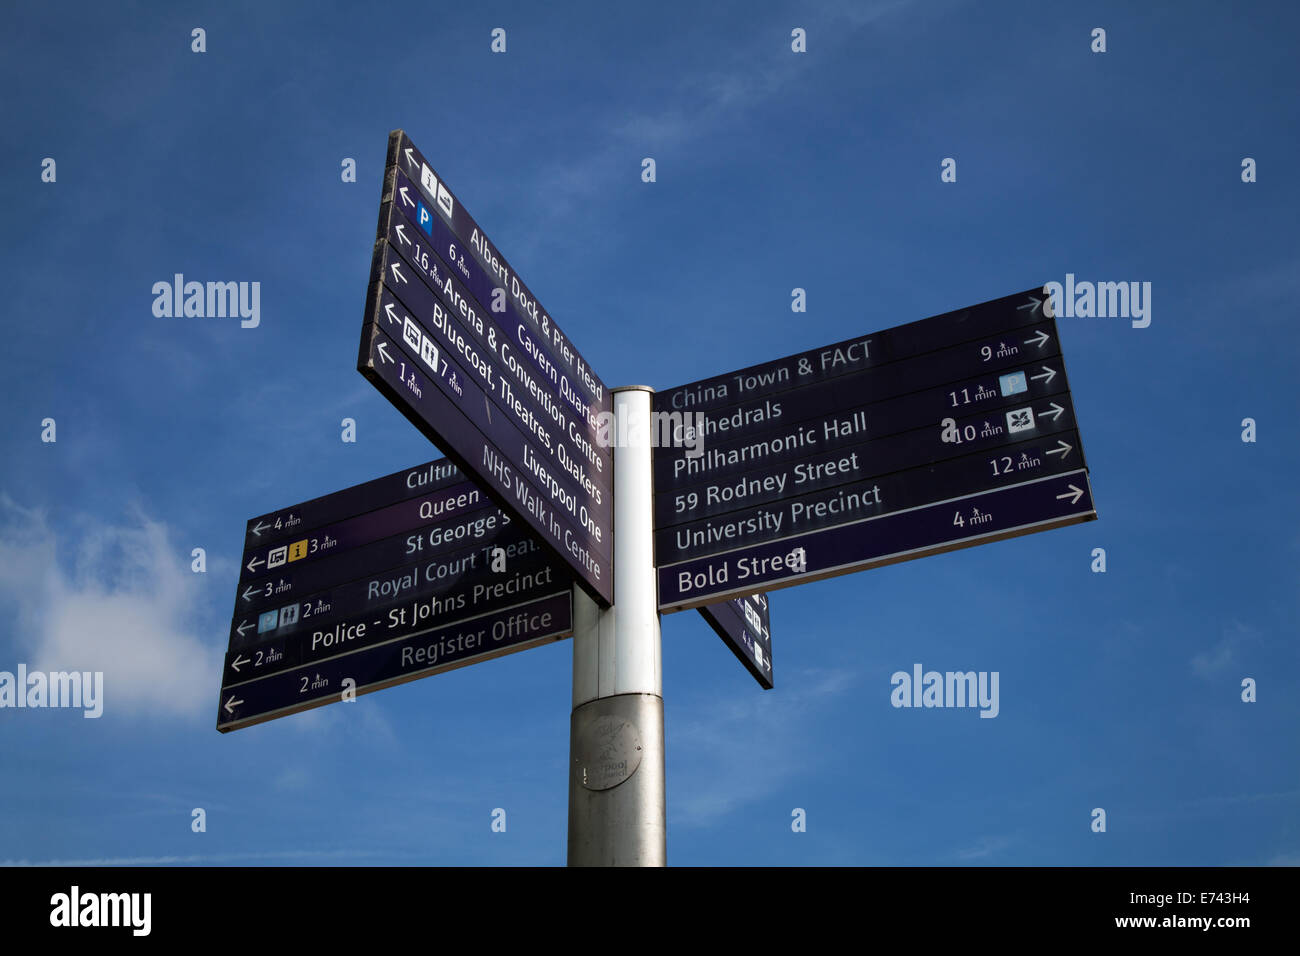 Street sign with different destinations.  Multi-Directional Tourist Signpost  for attractions in Liverpool, Merseyside, UK Stock Photo